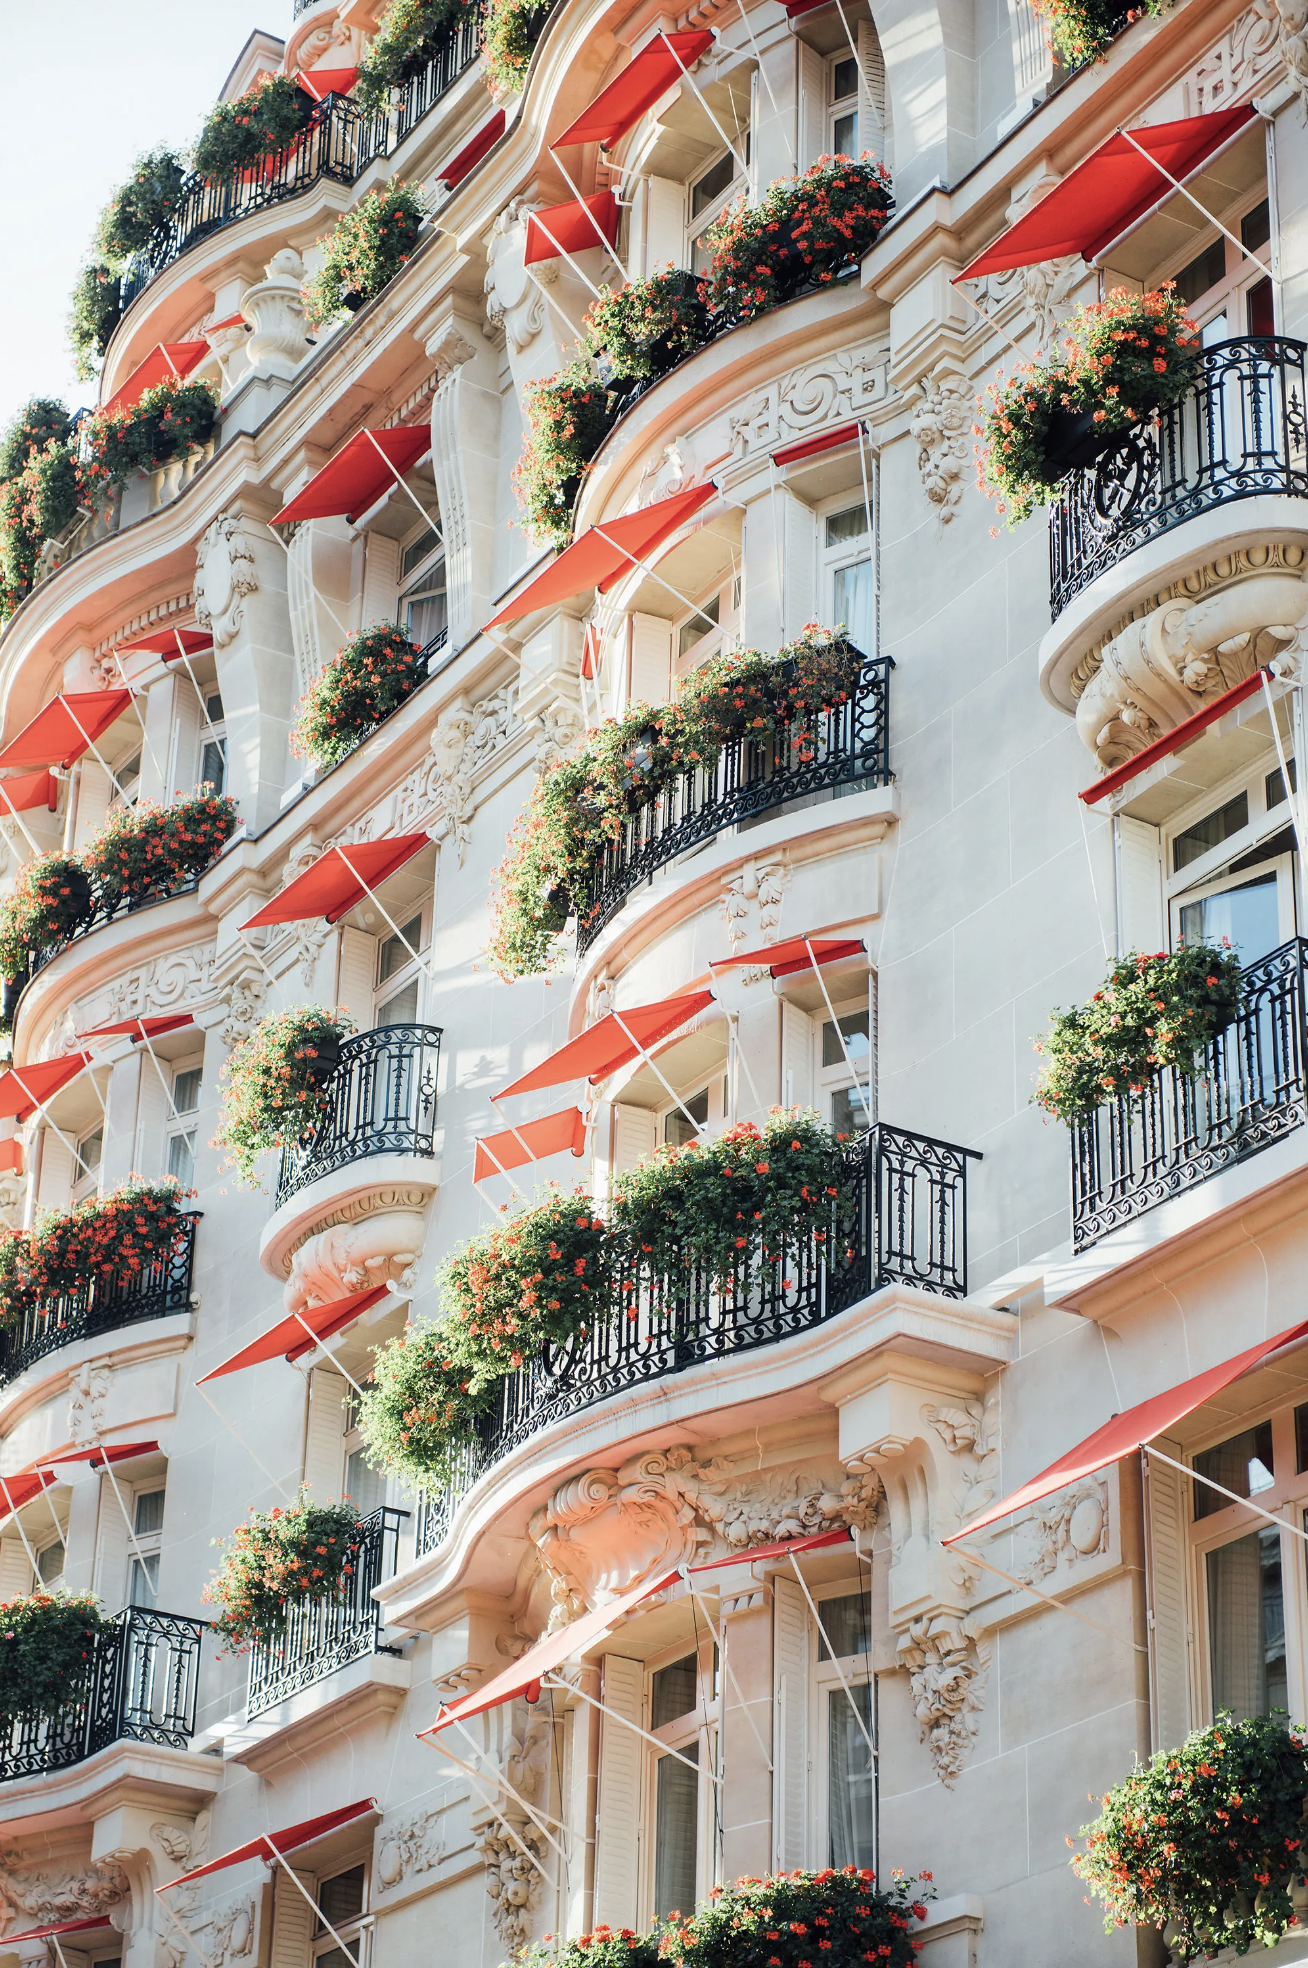 The Art Deco style exterior of Hotel Plaza Athénée with alabaster stone, iron terraces, 2000 red geraniums and signature red awnings